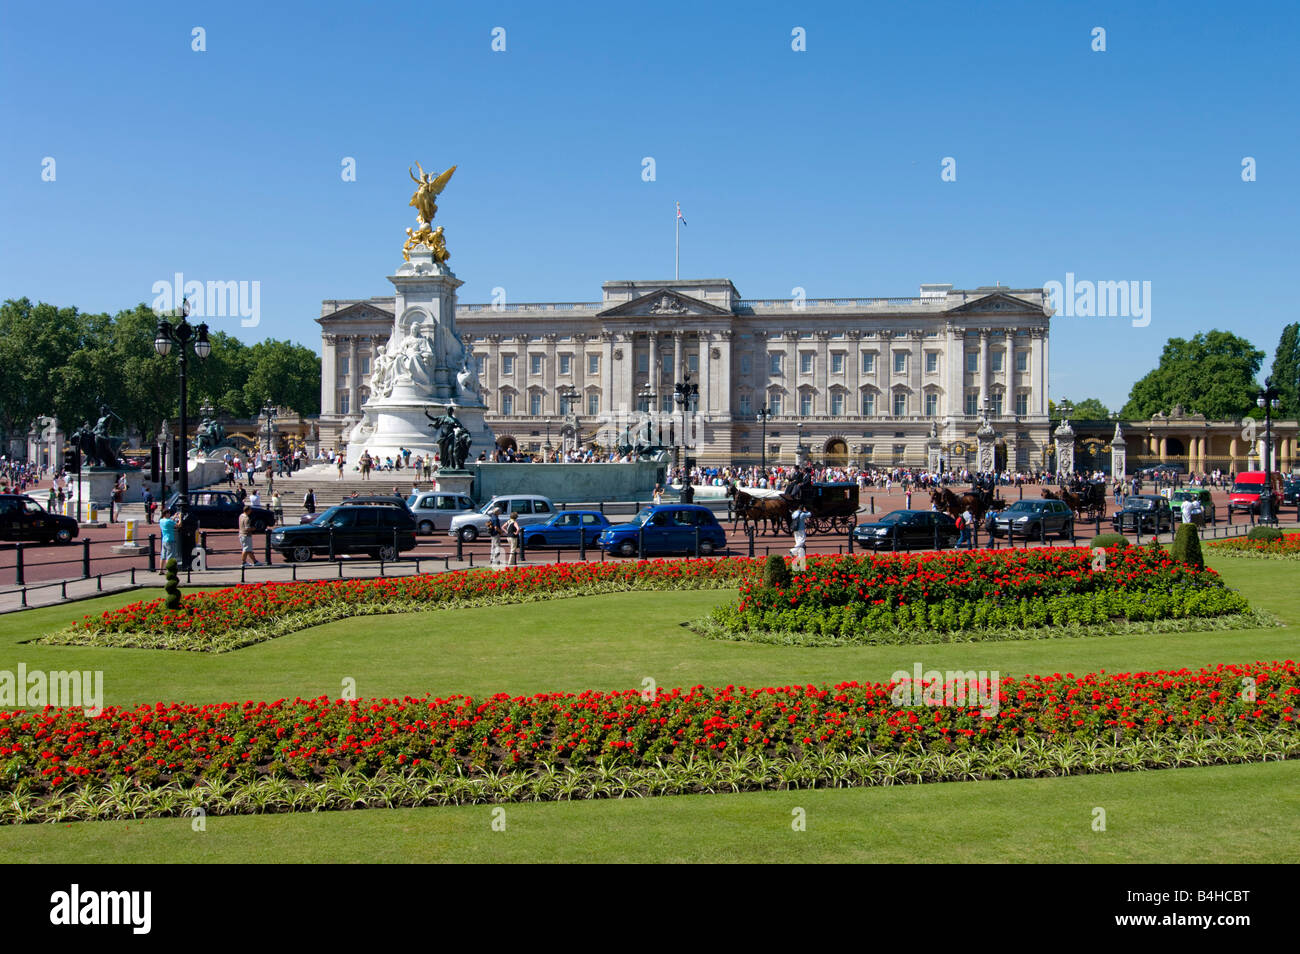 Flowers blooming in garden with palace in background Buckingham Palace City Of Westminster London England Stock Photo